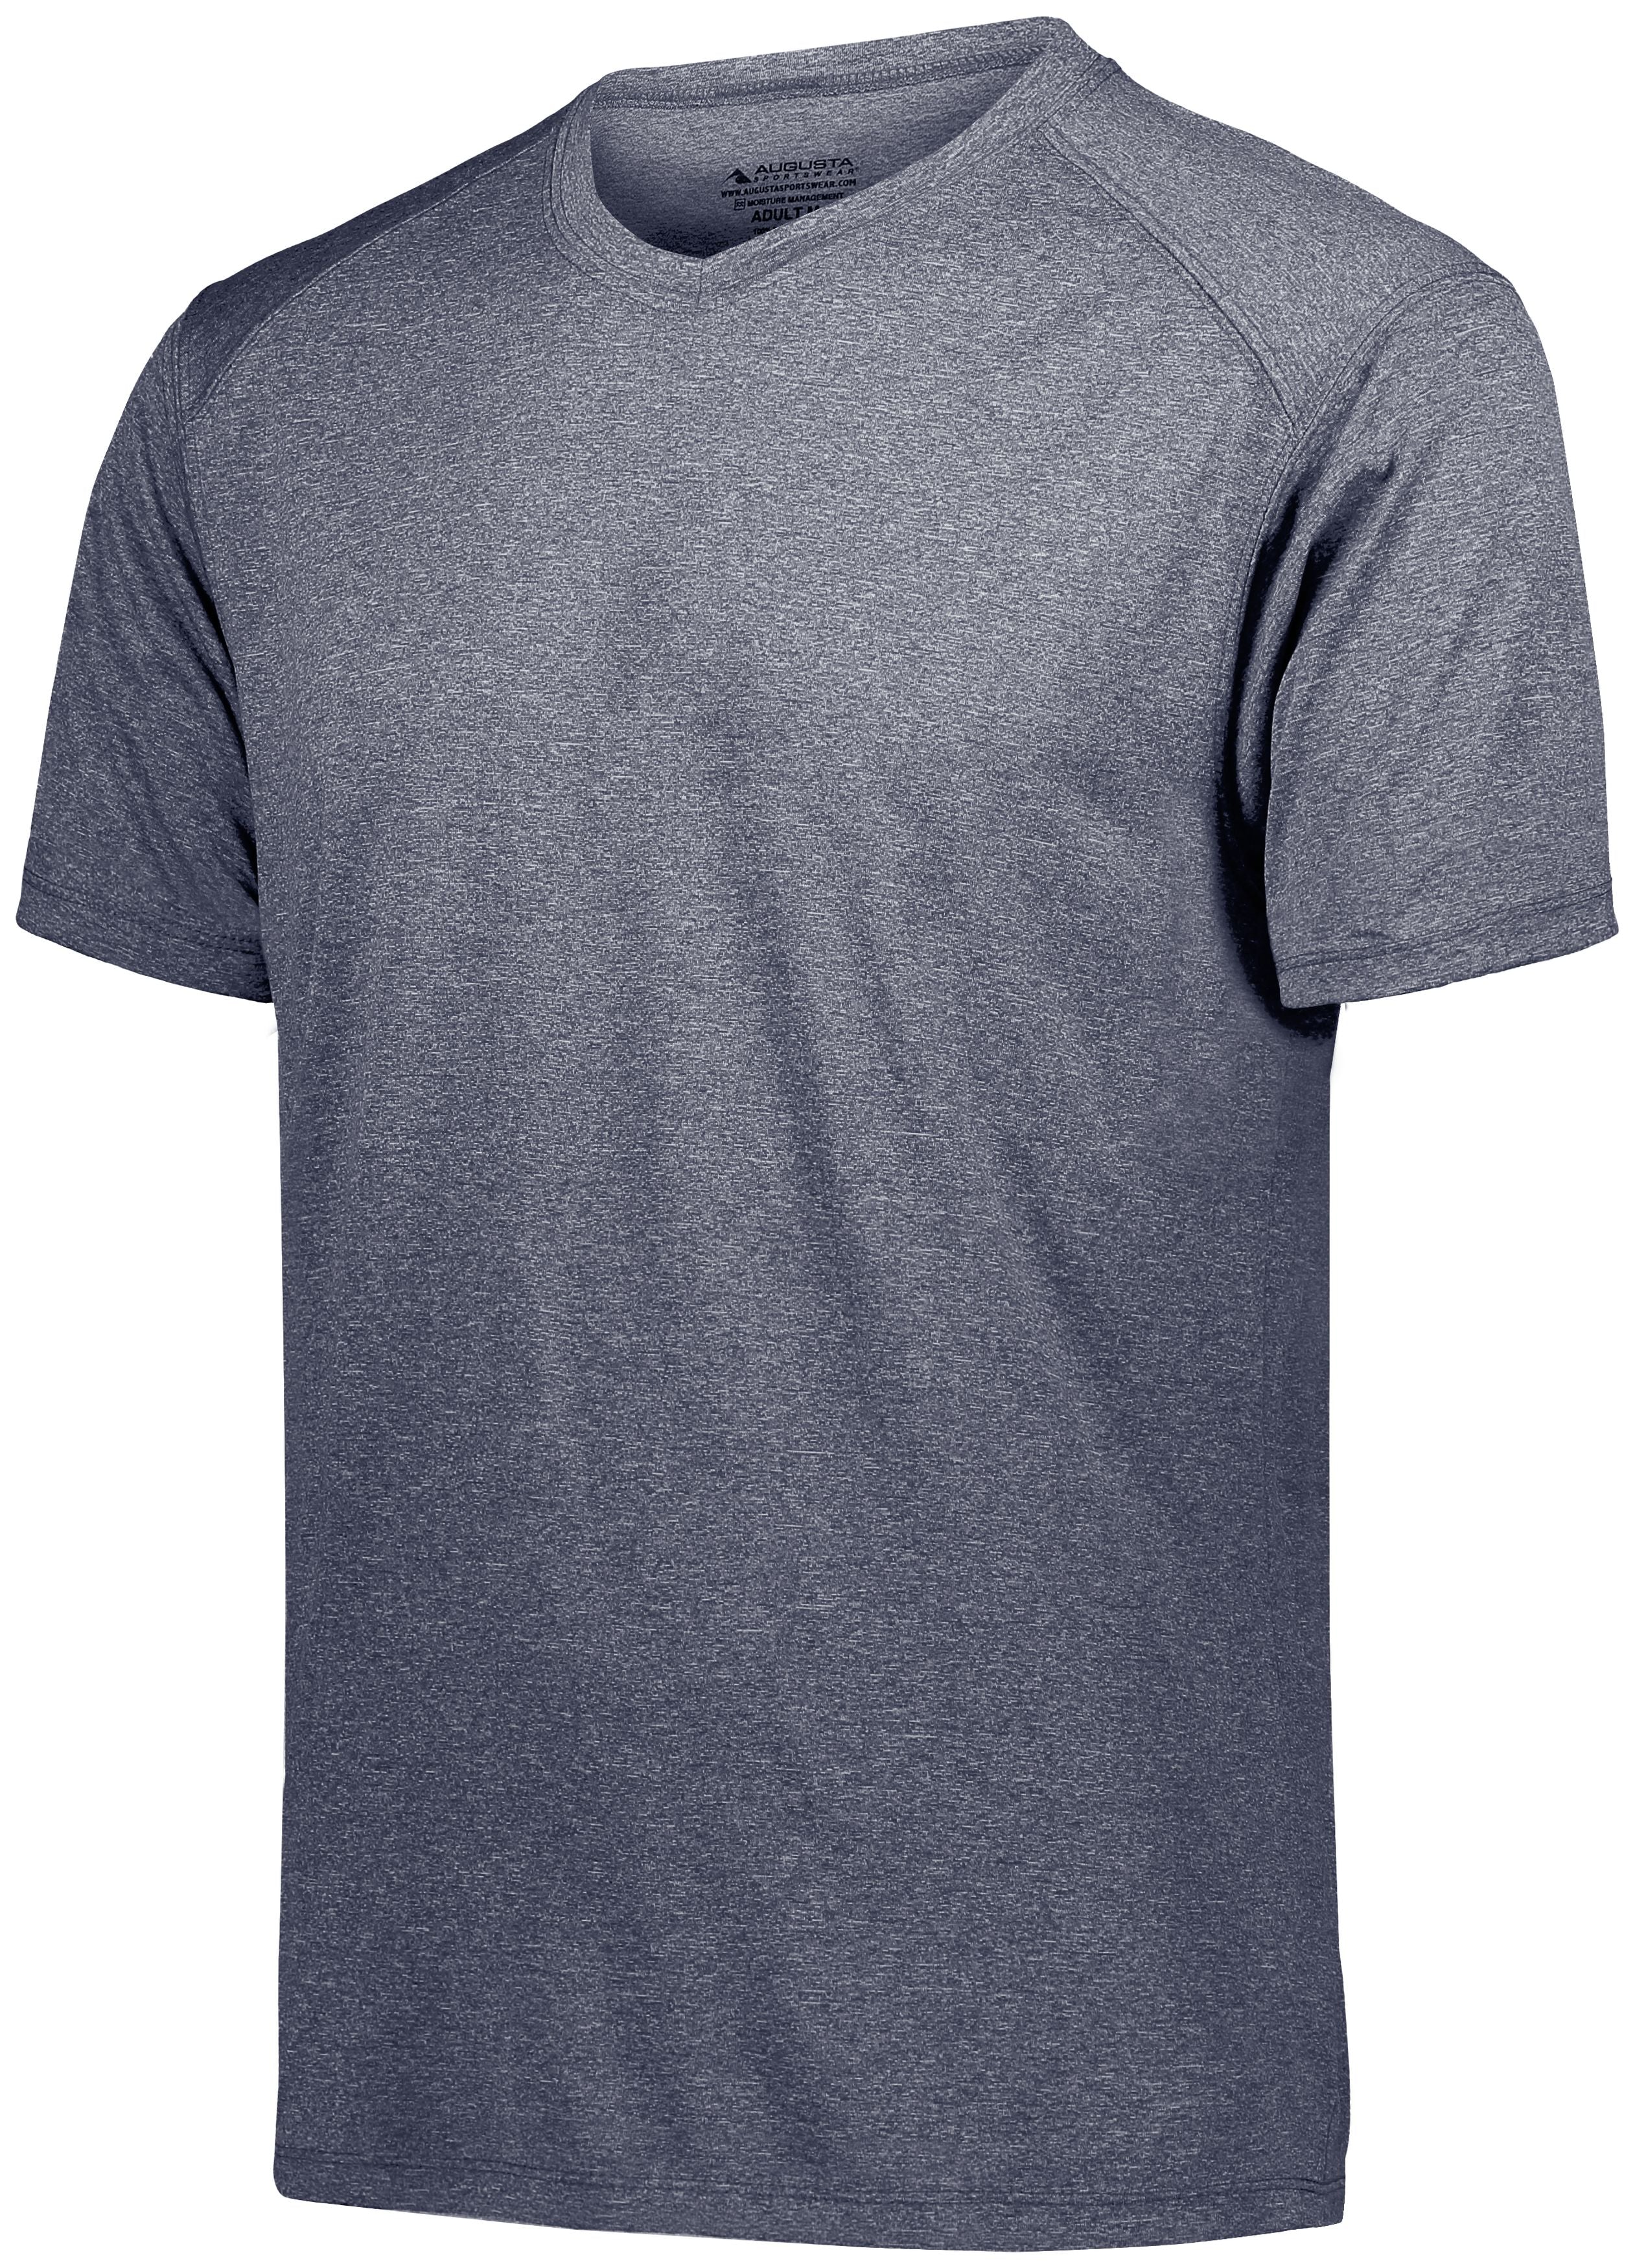 Augusta Sportswear Kinergy Training Tee in Graphite Heather  -Part of the Adult, Adult-Tee-Shirt, T-Shirts, Augusta-Products, Shirts product lines at KanaleyCreations.com